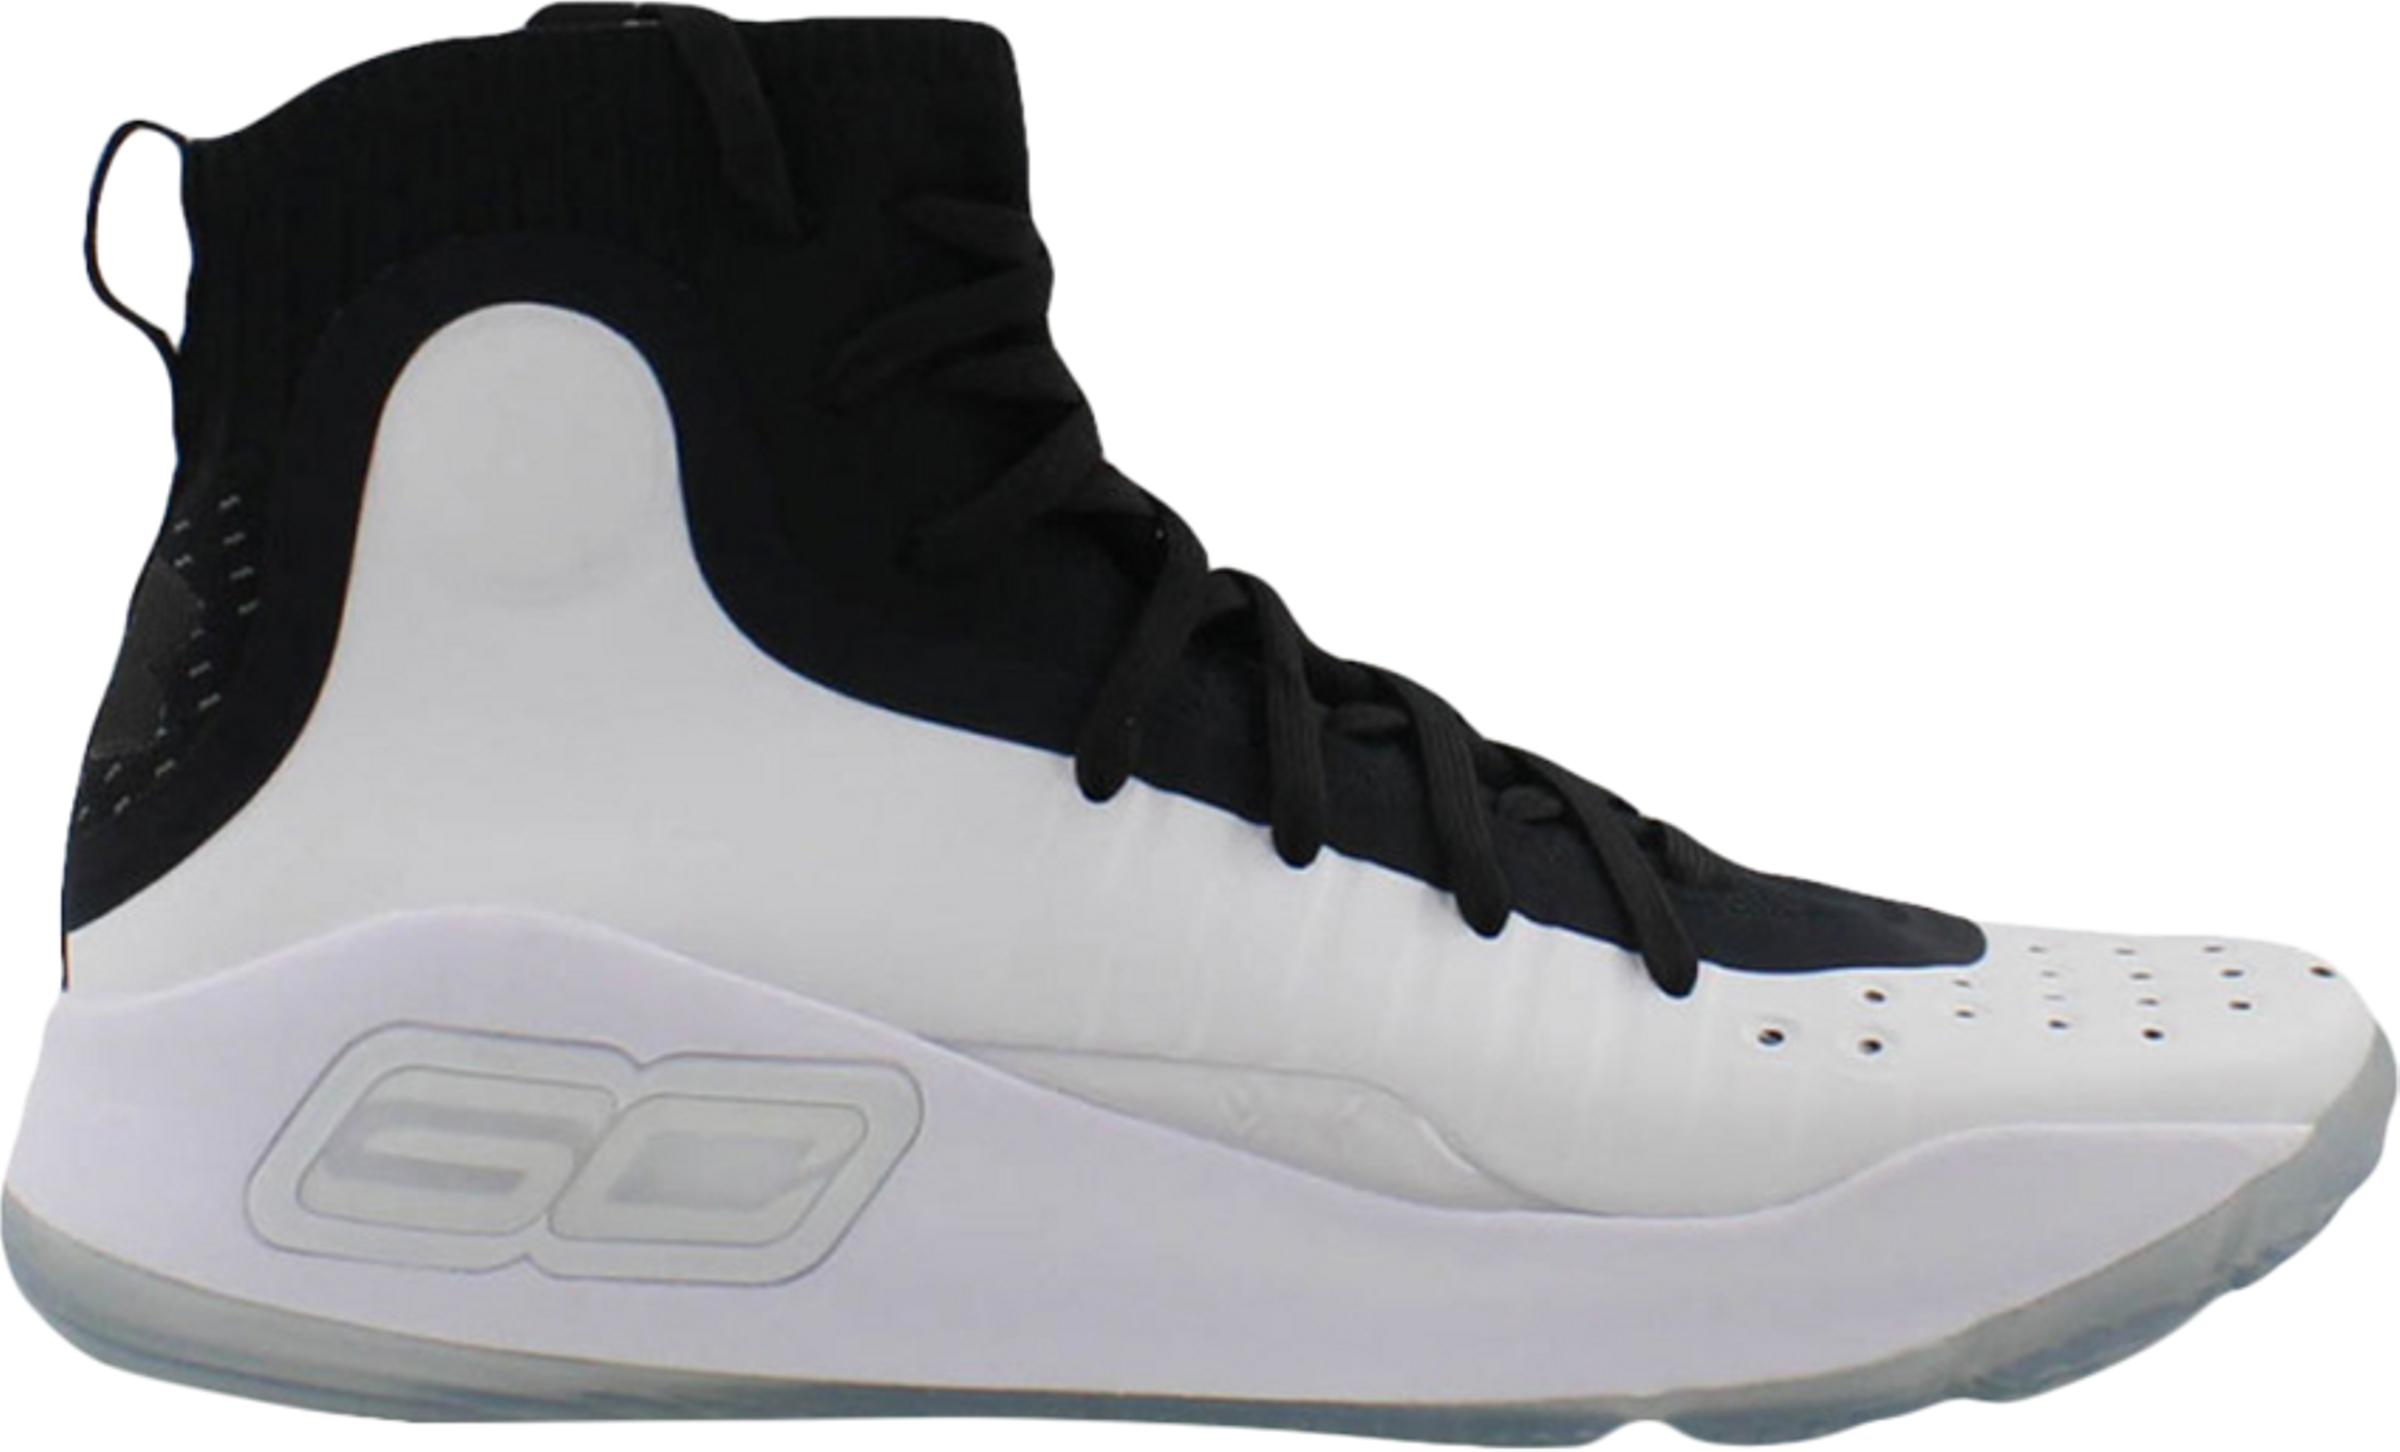 Curry 4 Mid GS 'Black White' | GOAT